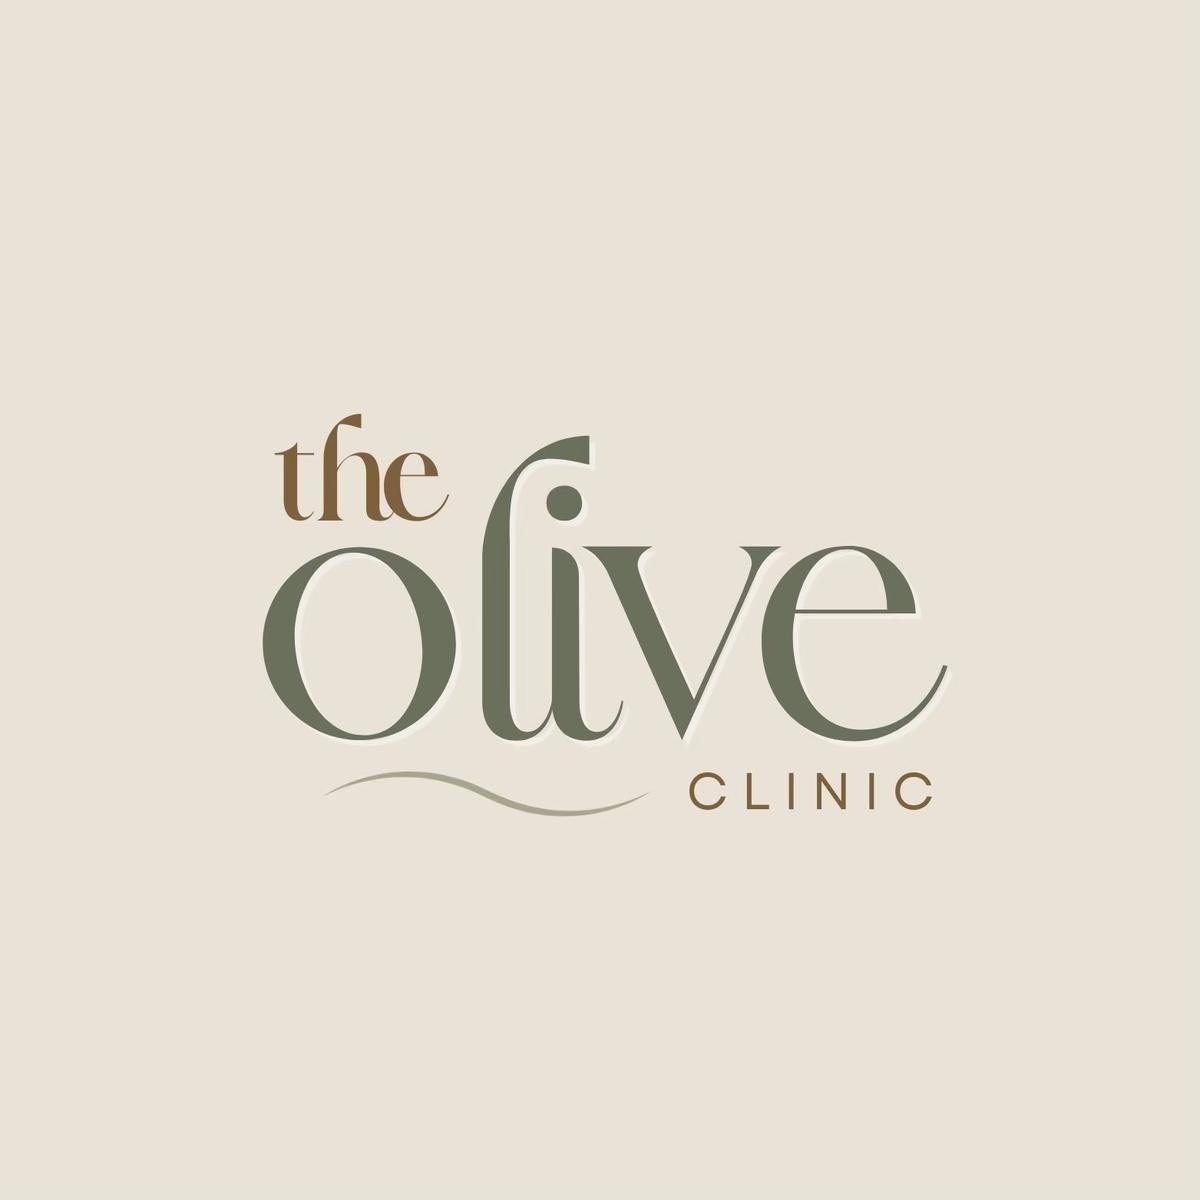 Theoliveclinic